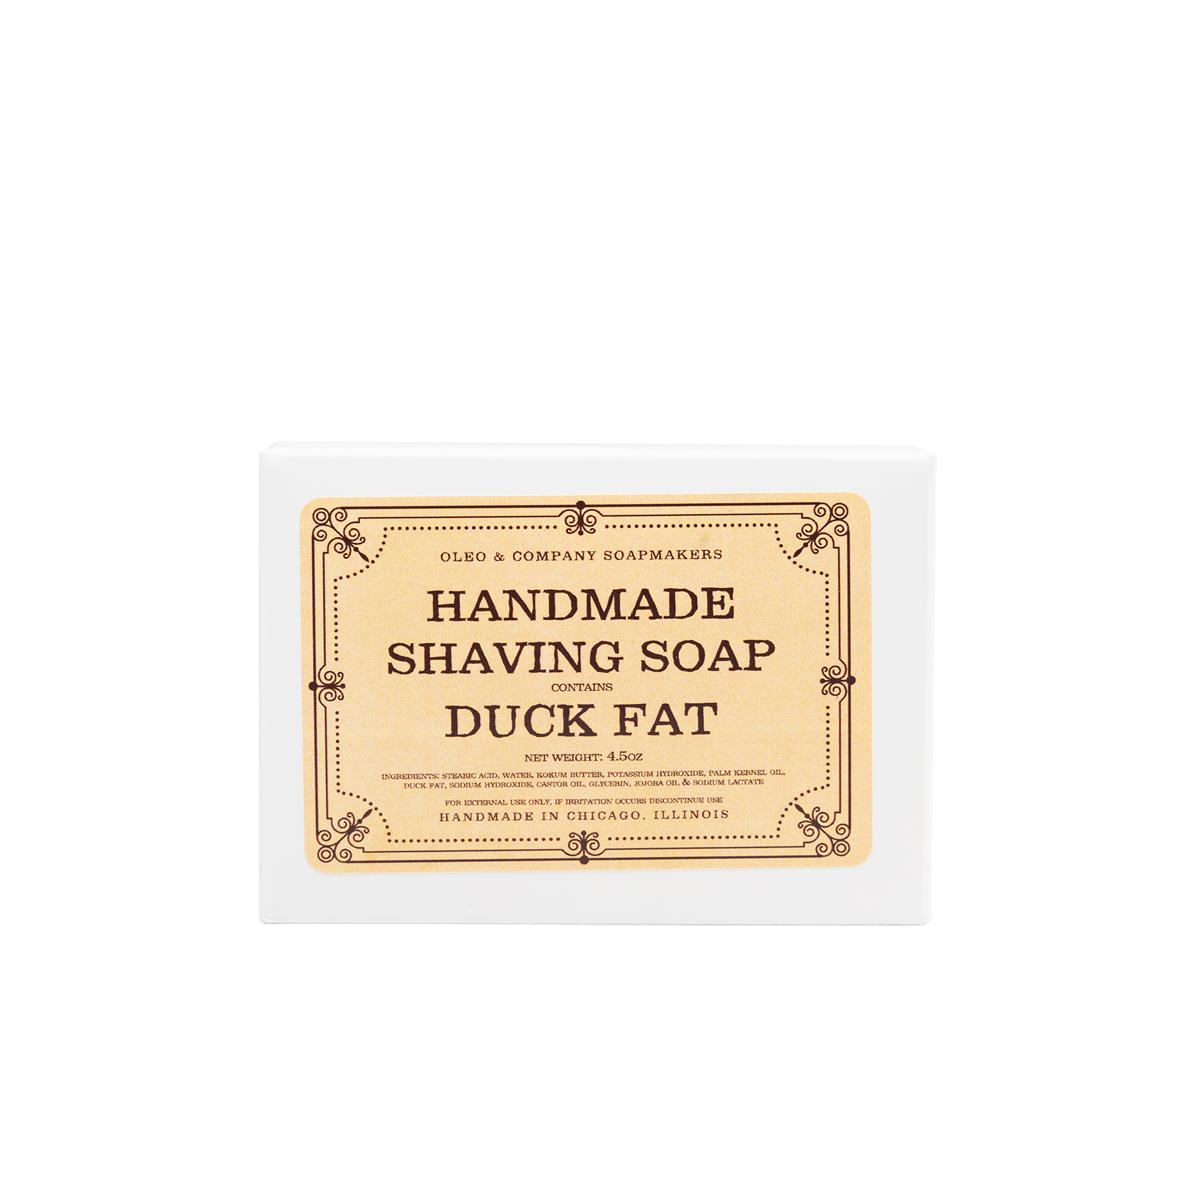 Primary image of Unscented Duck Fat Canard Shaving Soap